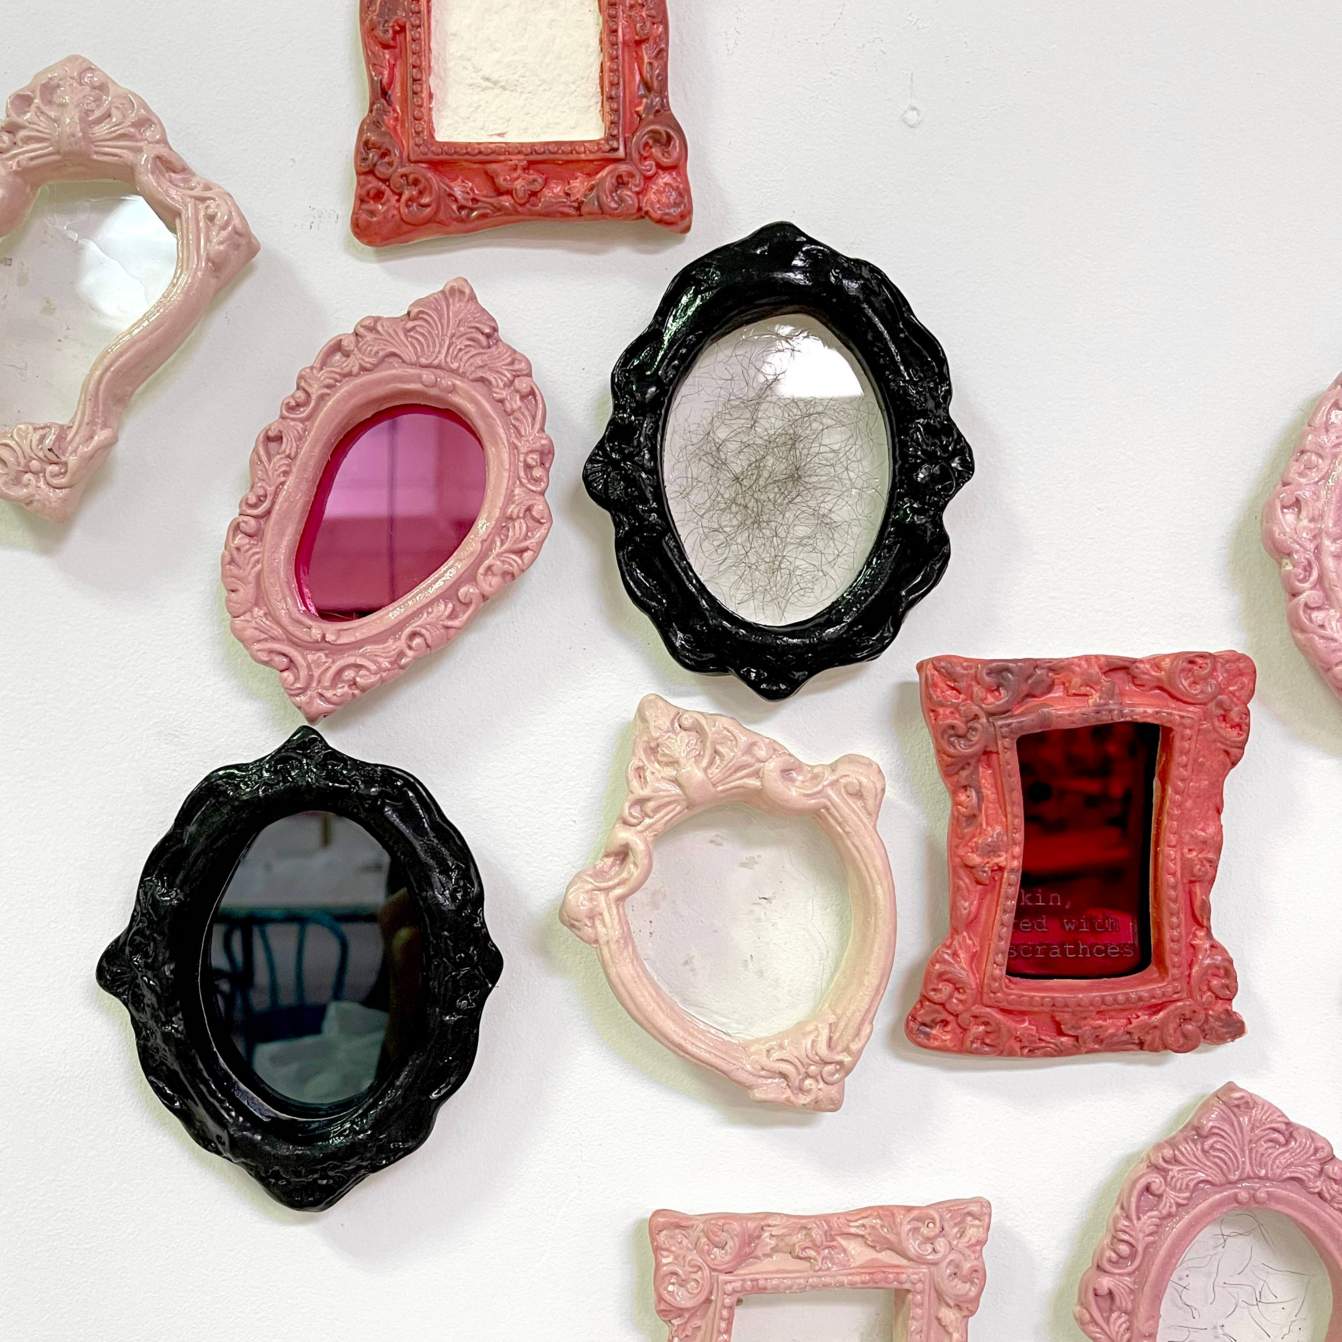 Student work: ceramic picture frames of various shapes encircling mirrors and installed in a group